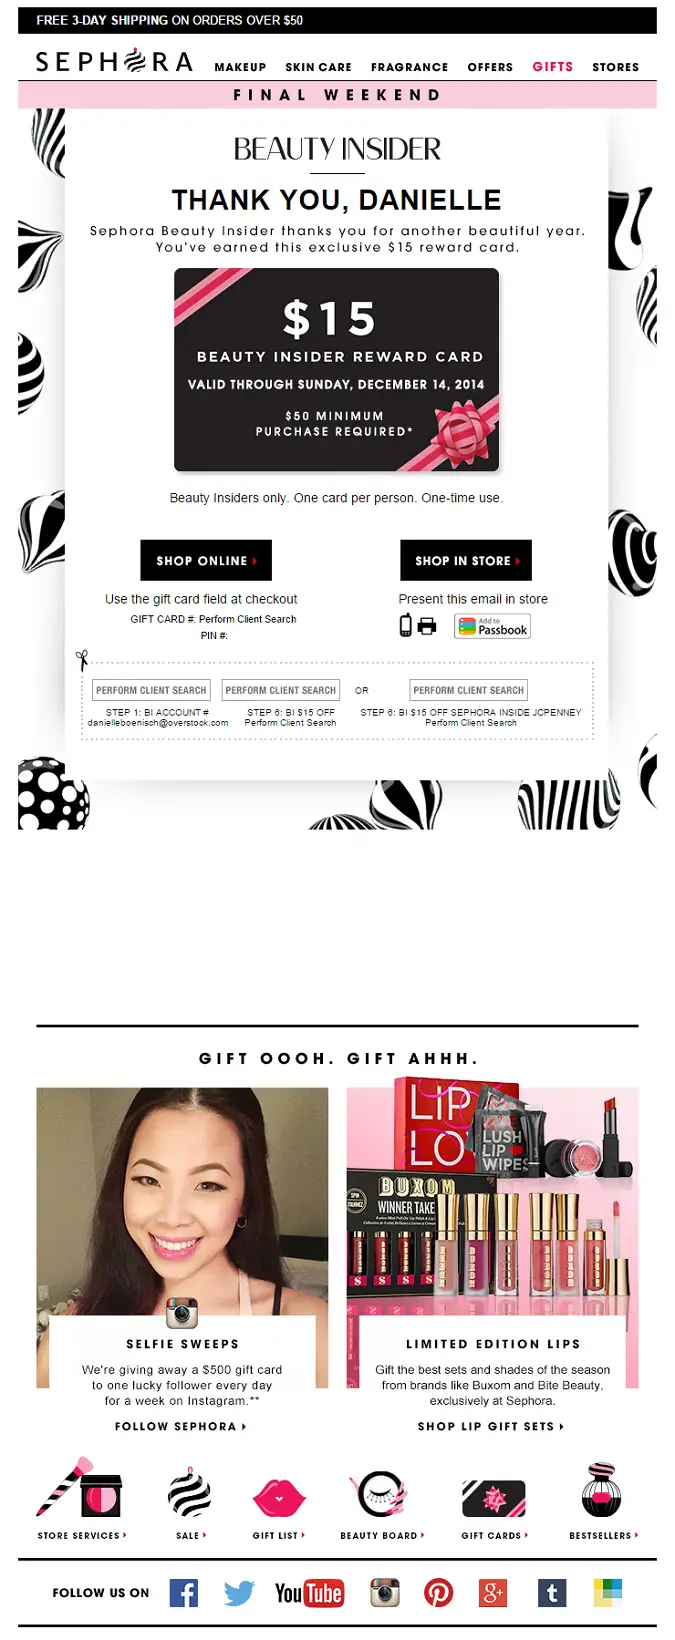 makeup_brand_sephora_top_customers_email_treatment.png